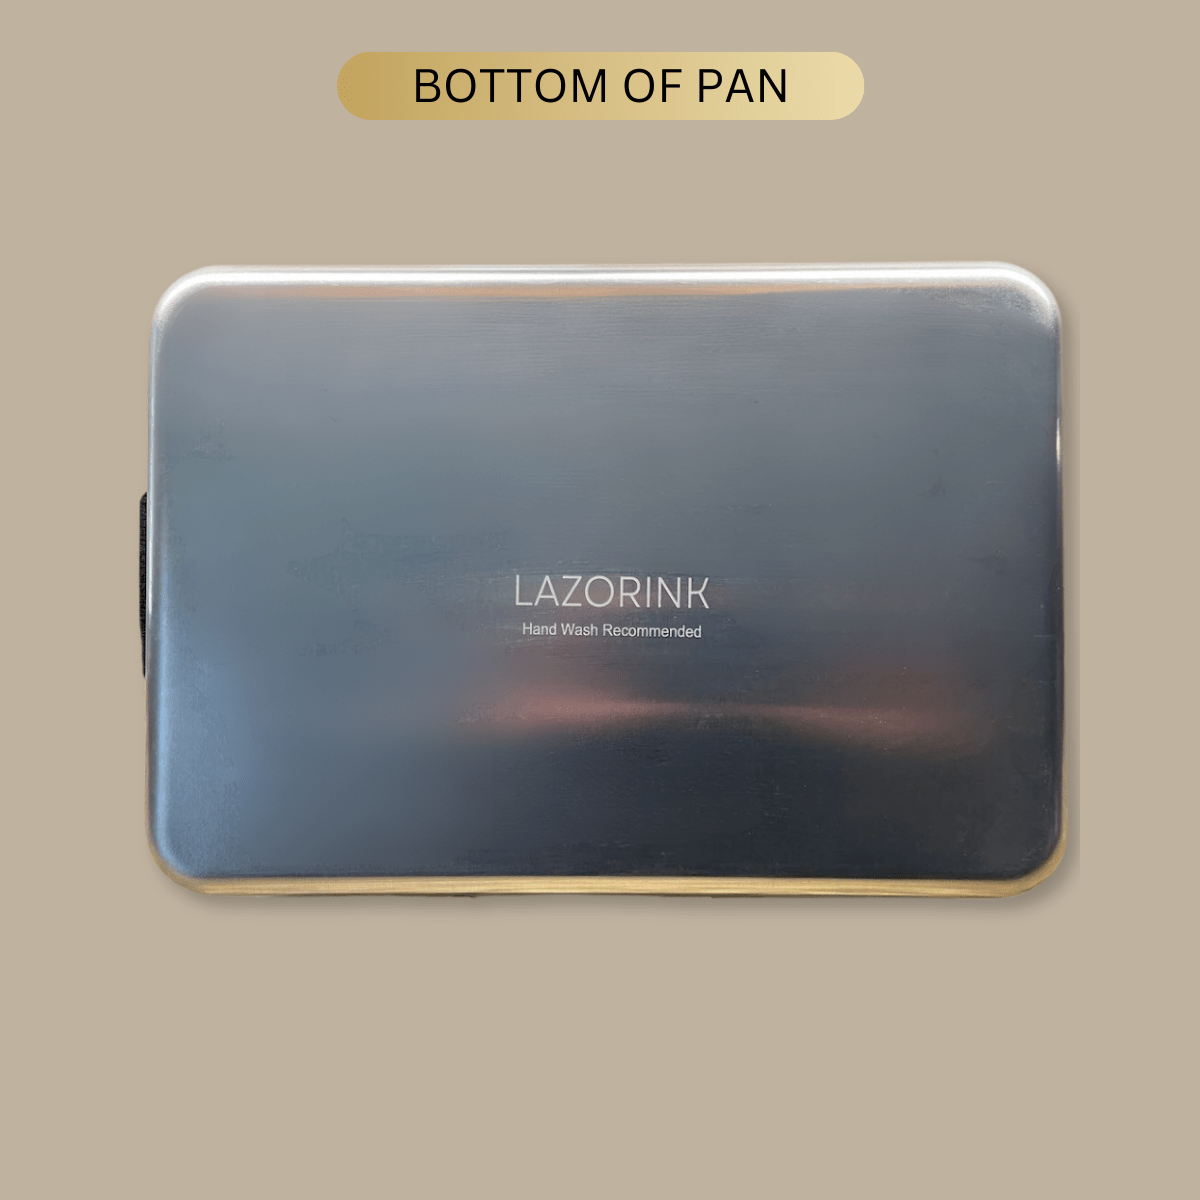 Happiness Is Homemade Engraved Aluminum Cake Pan + Lid - Queen B Home